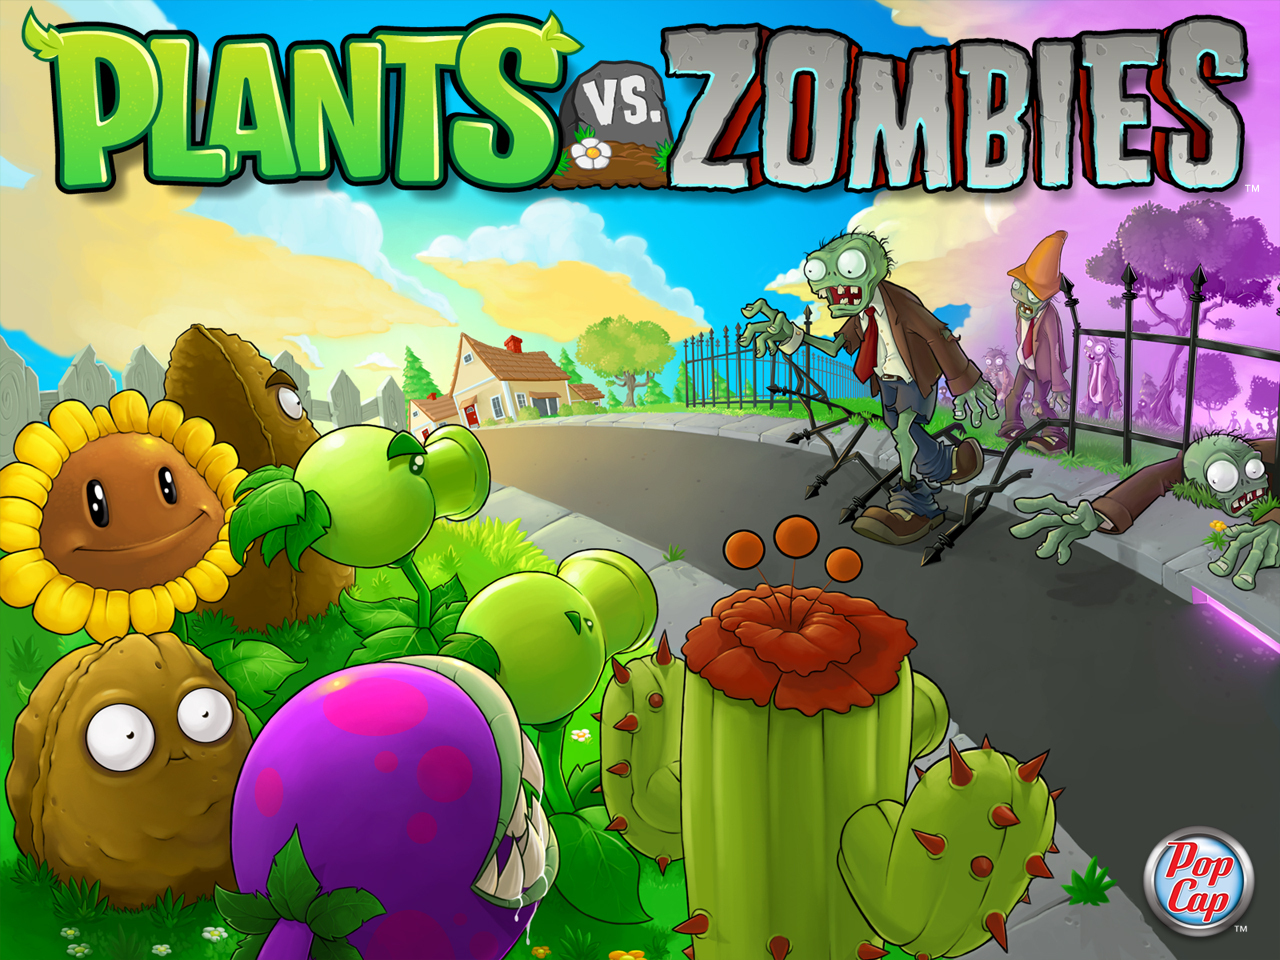 will there be plants vs zombies 3